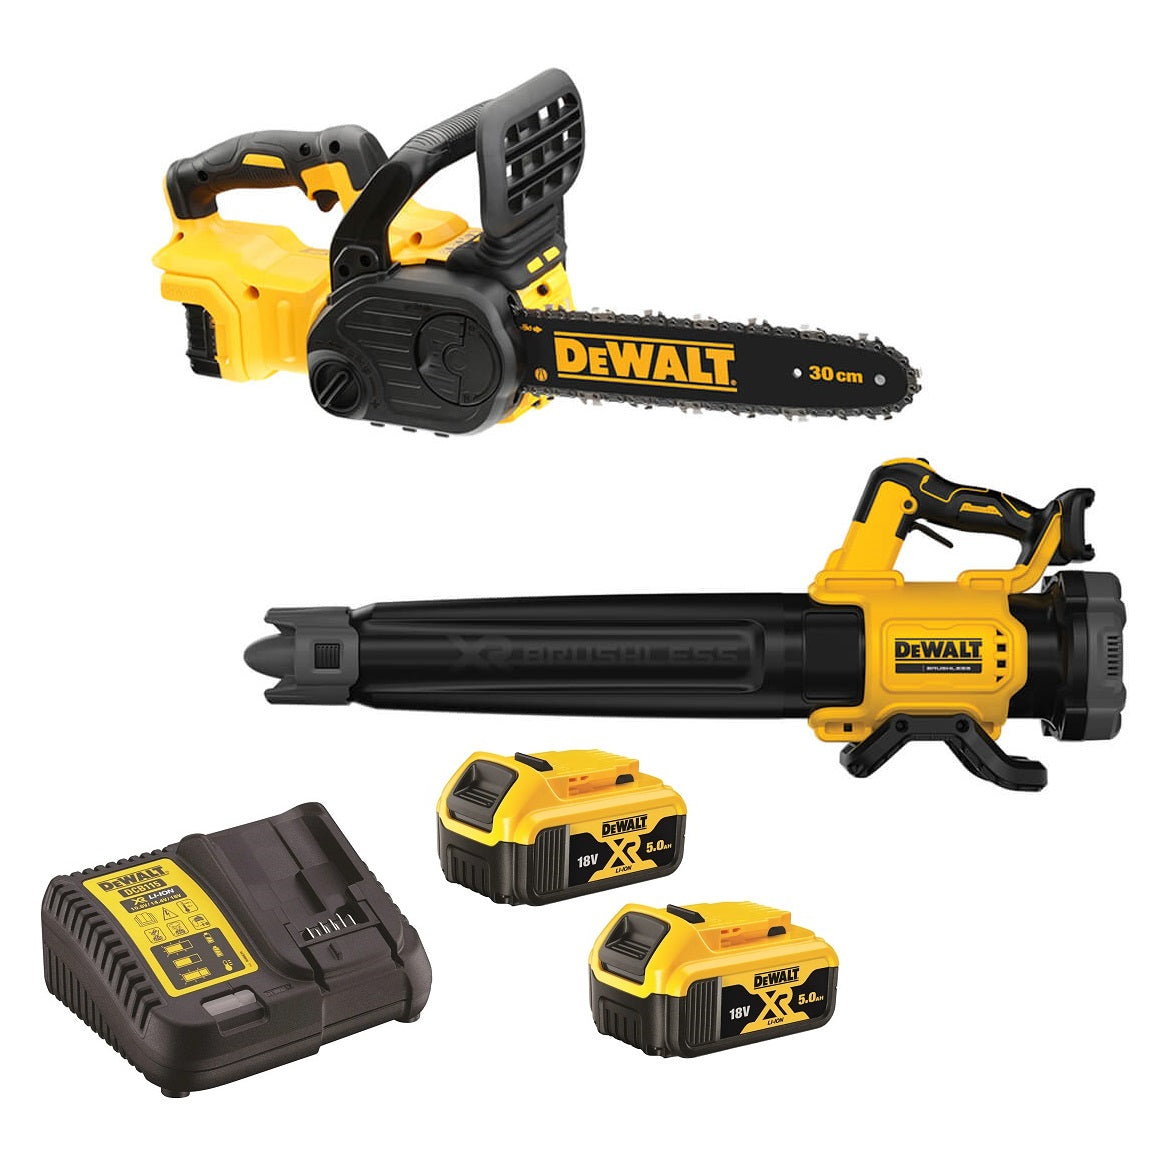 2Pce 18V 5.0Ah Chainsaw + Blower Kit DCZ243P2-XE by Dewalt